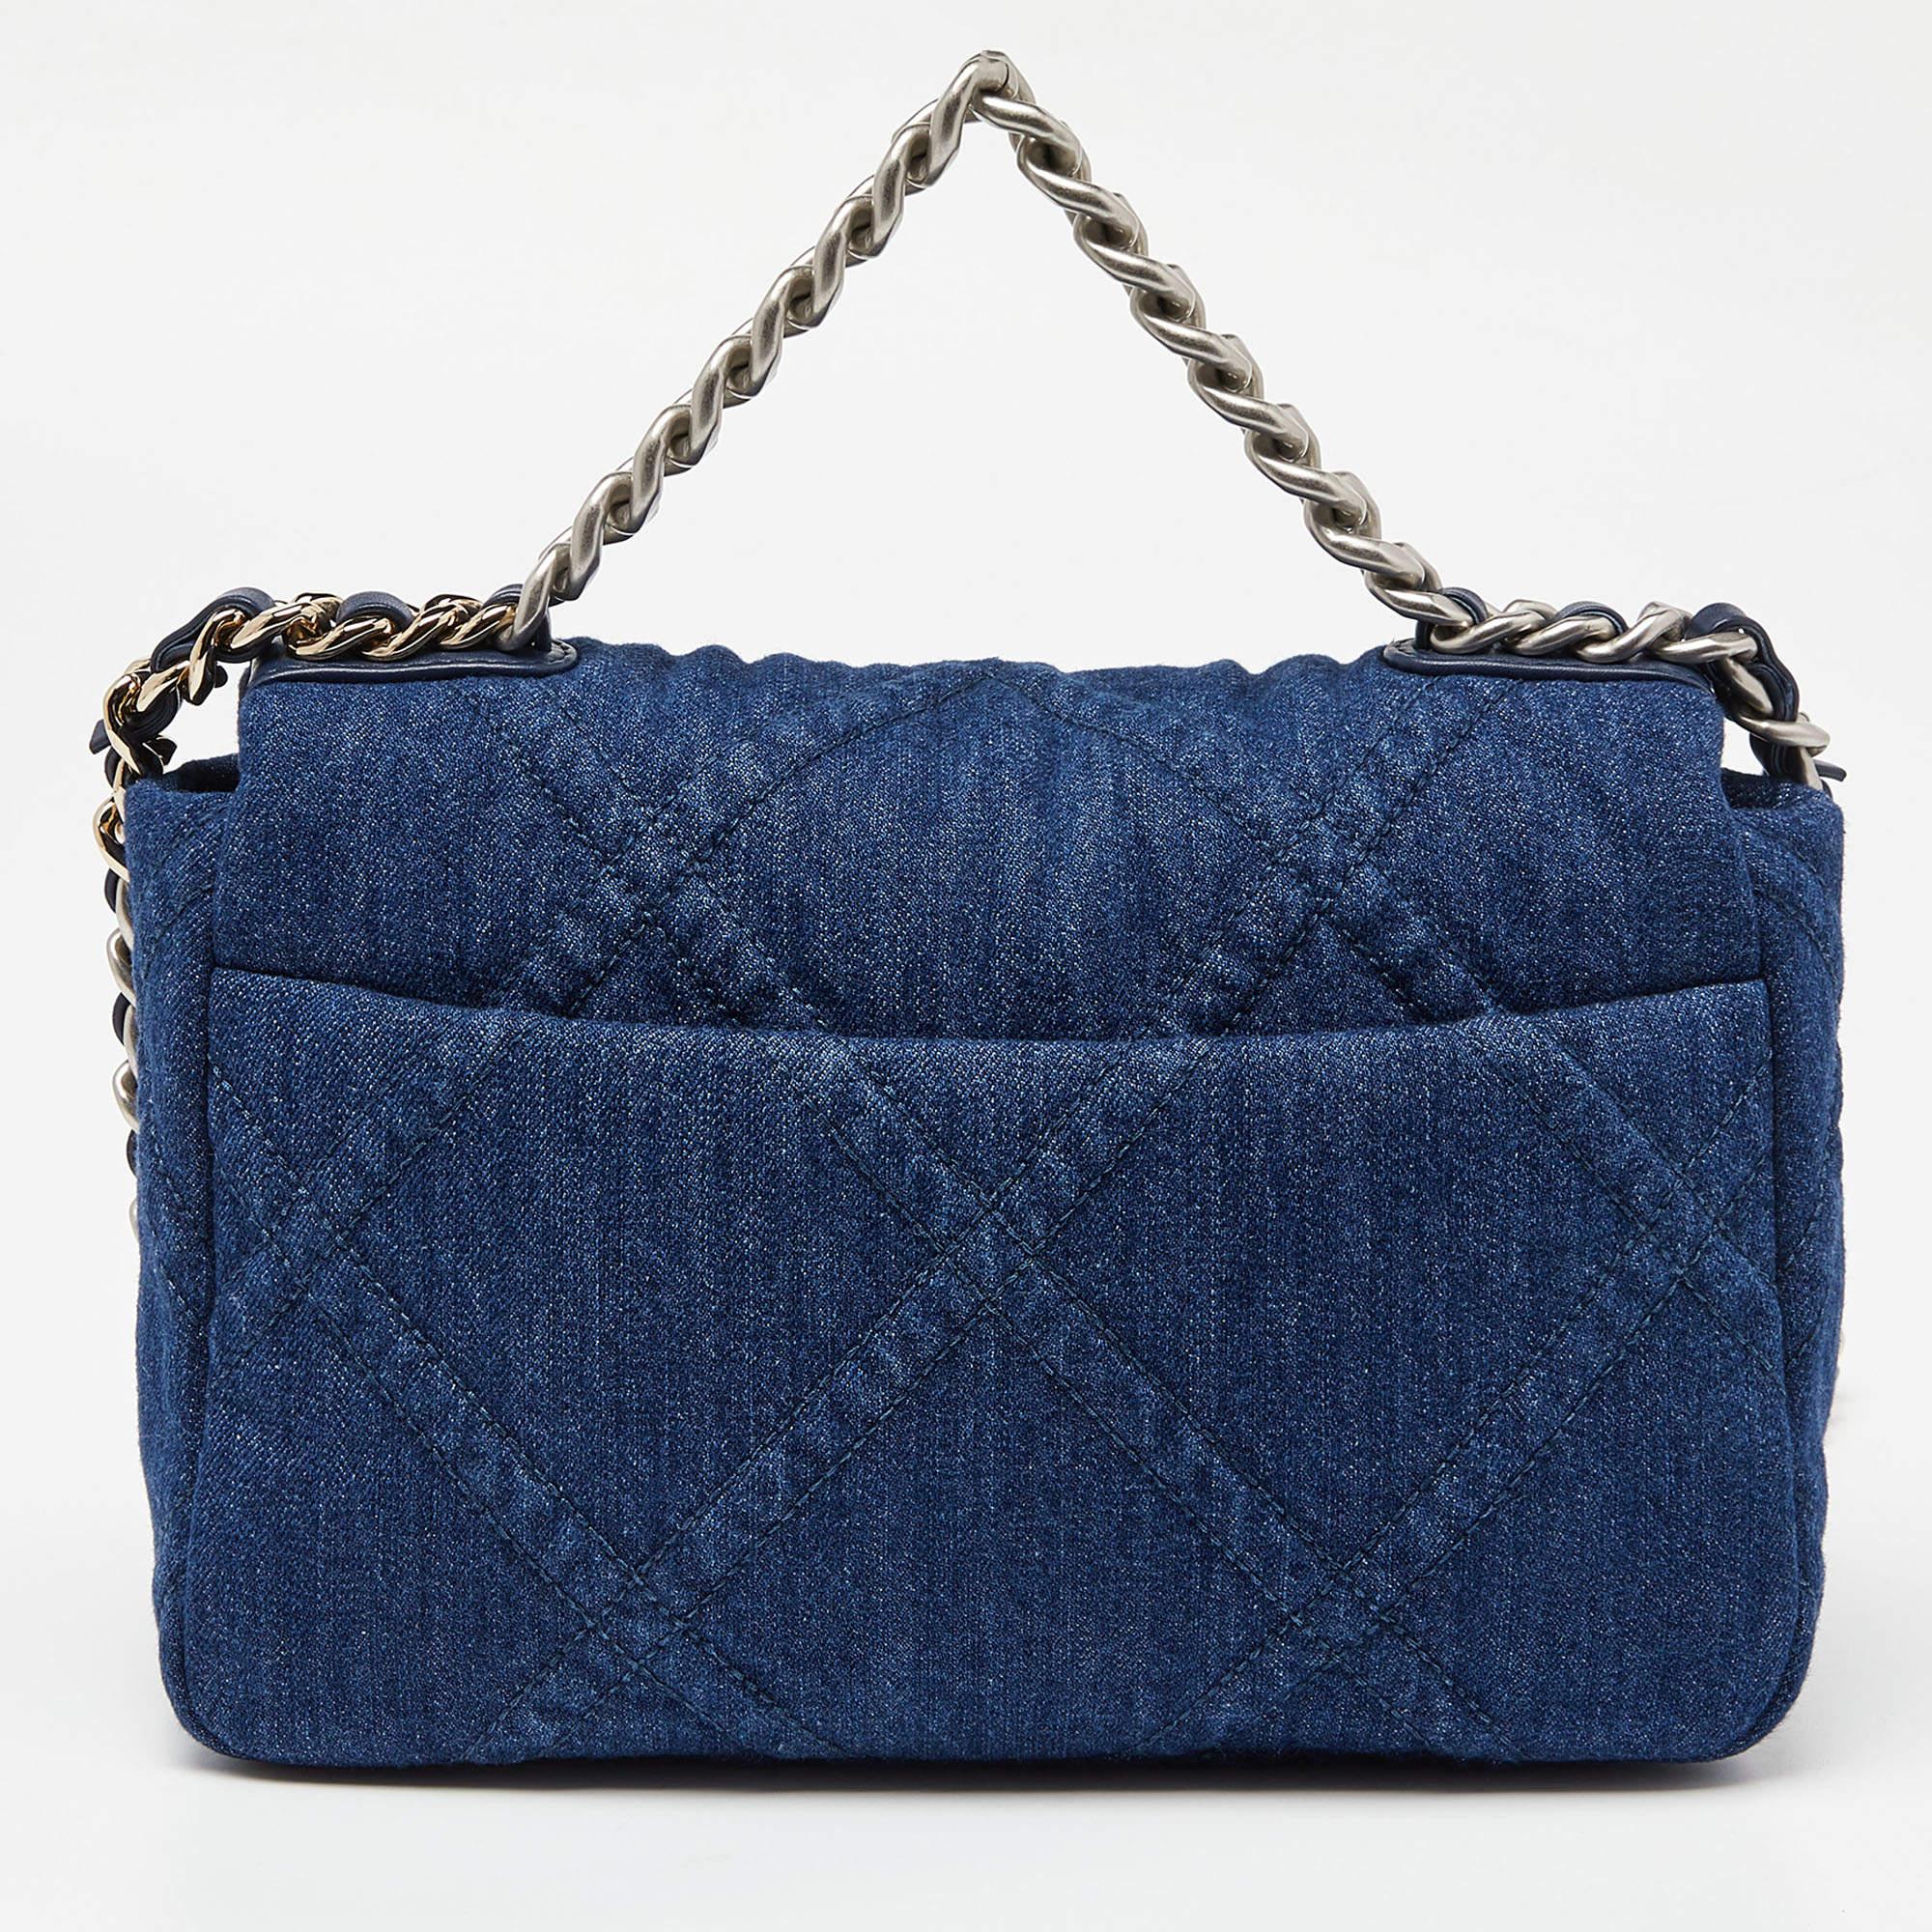 First unveiled in the Chanel Fall 2019 collection, the Chanel 19 bag is named after the year of its release, just like the Chanel 2.55. In design, the bag has exaggerated quilting and hardware in two tones. This version in blue is made from quilted